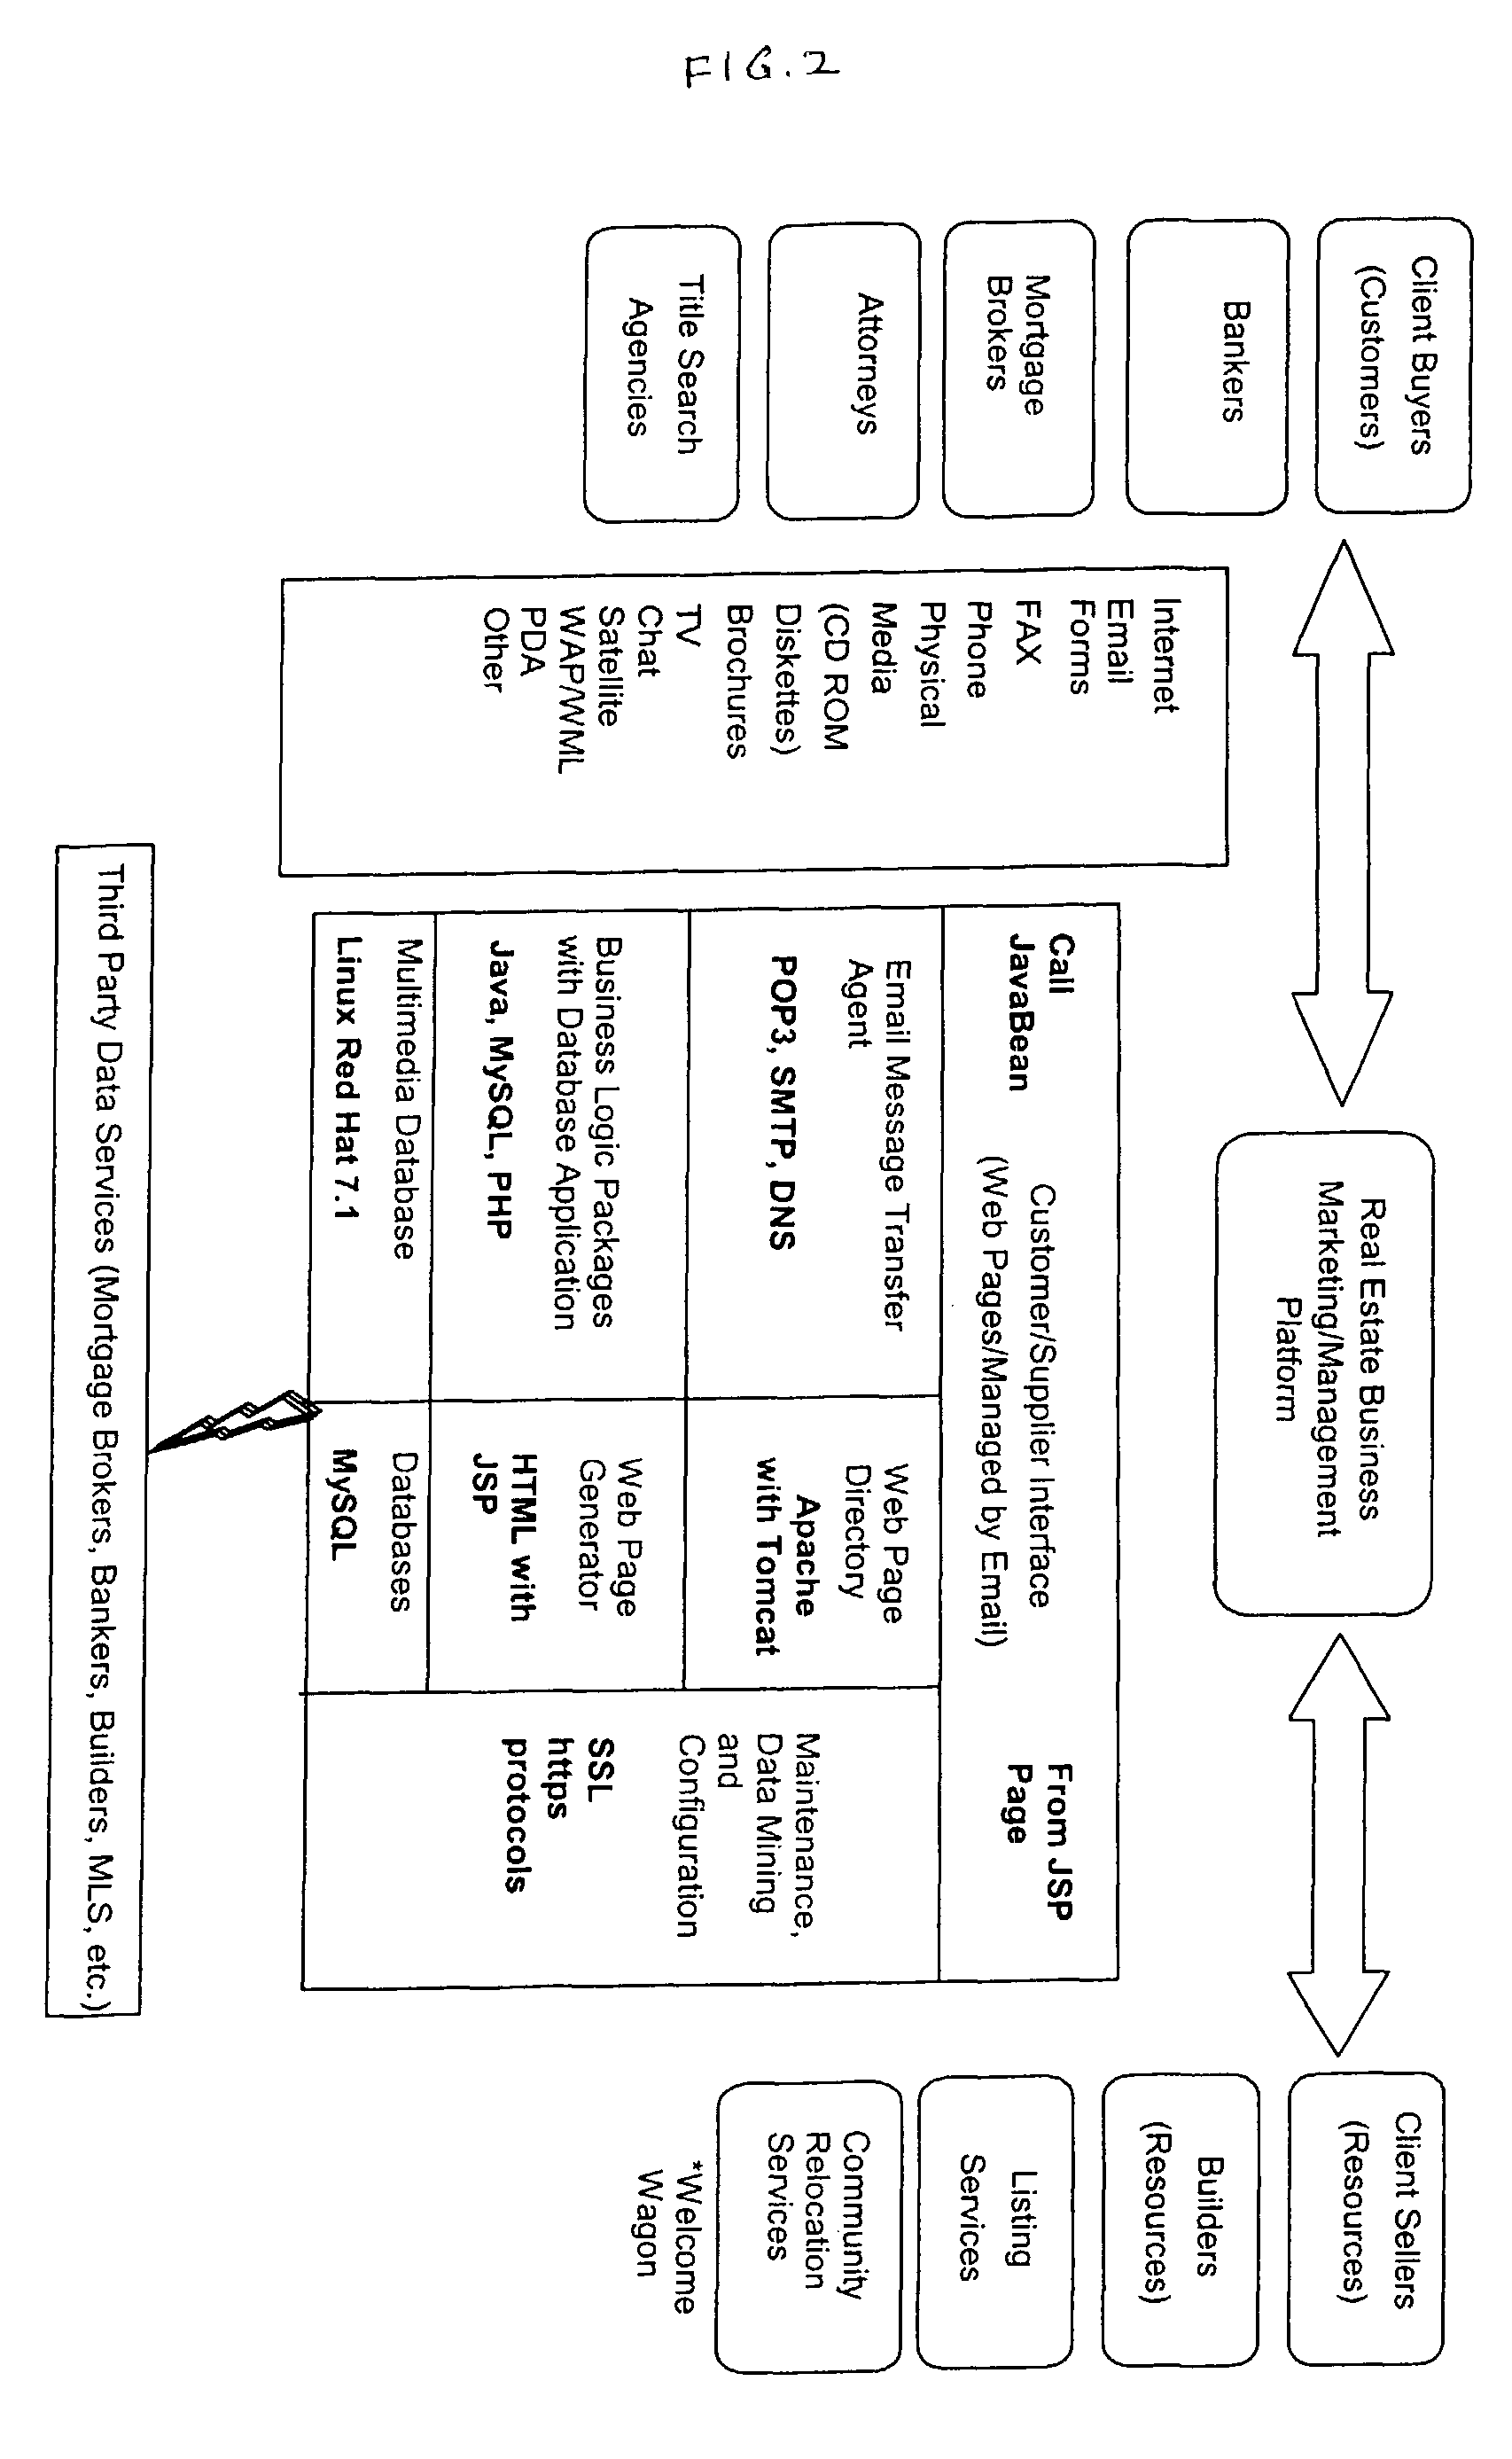 Electronic realty and transaction system and method therein